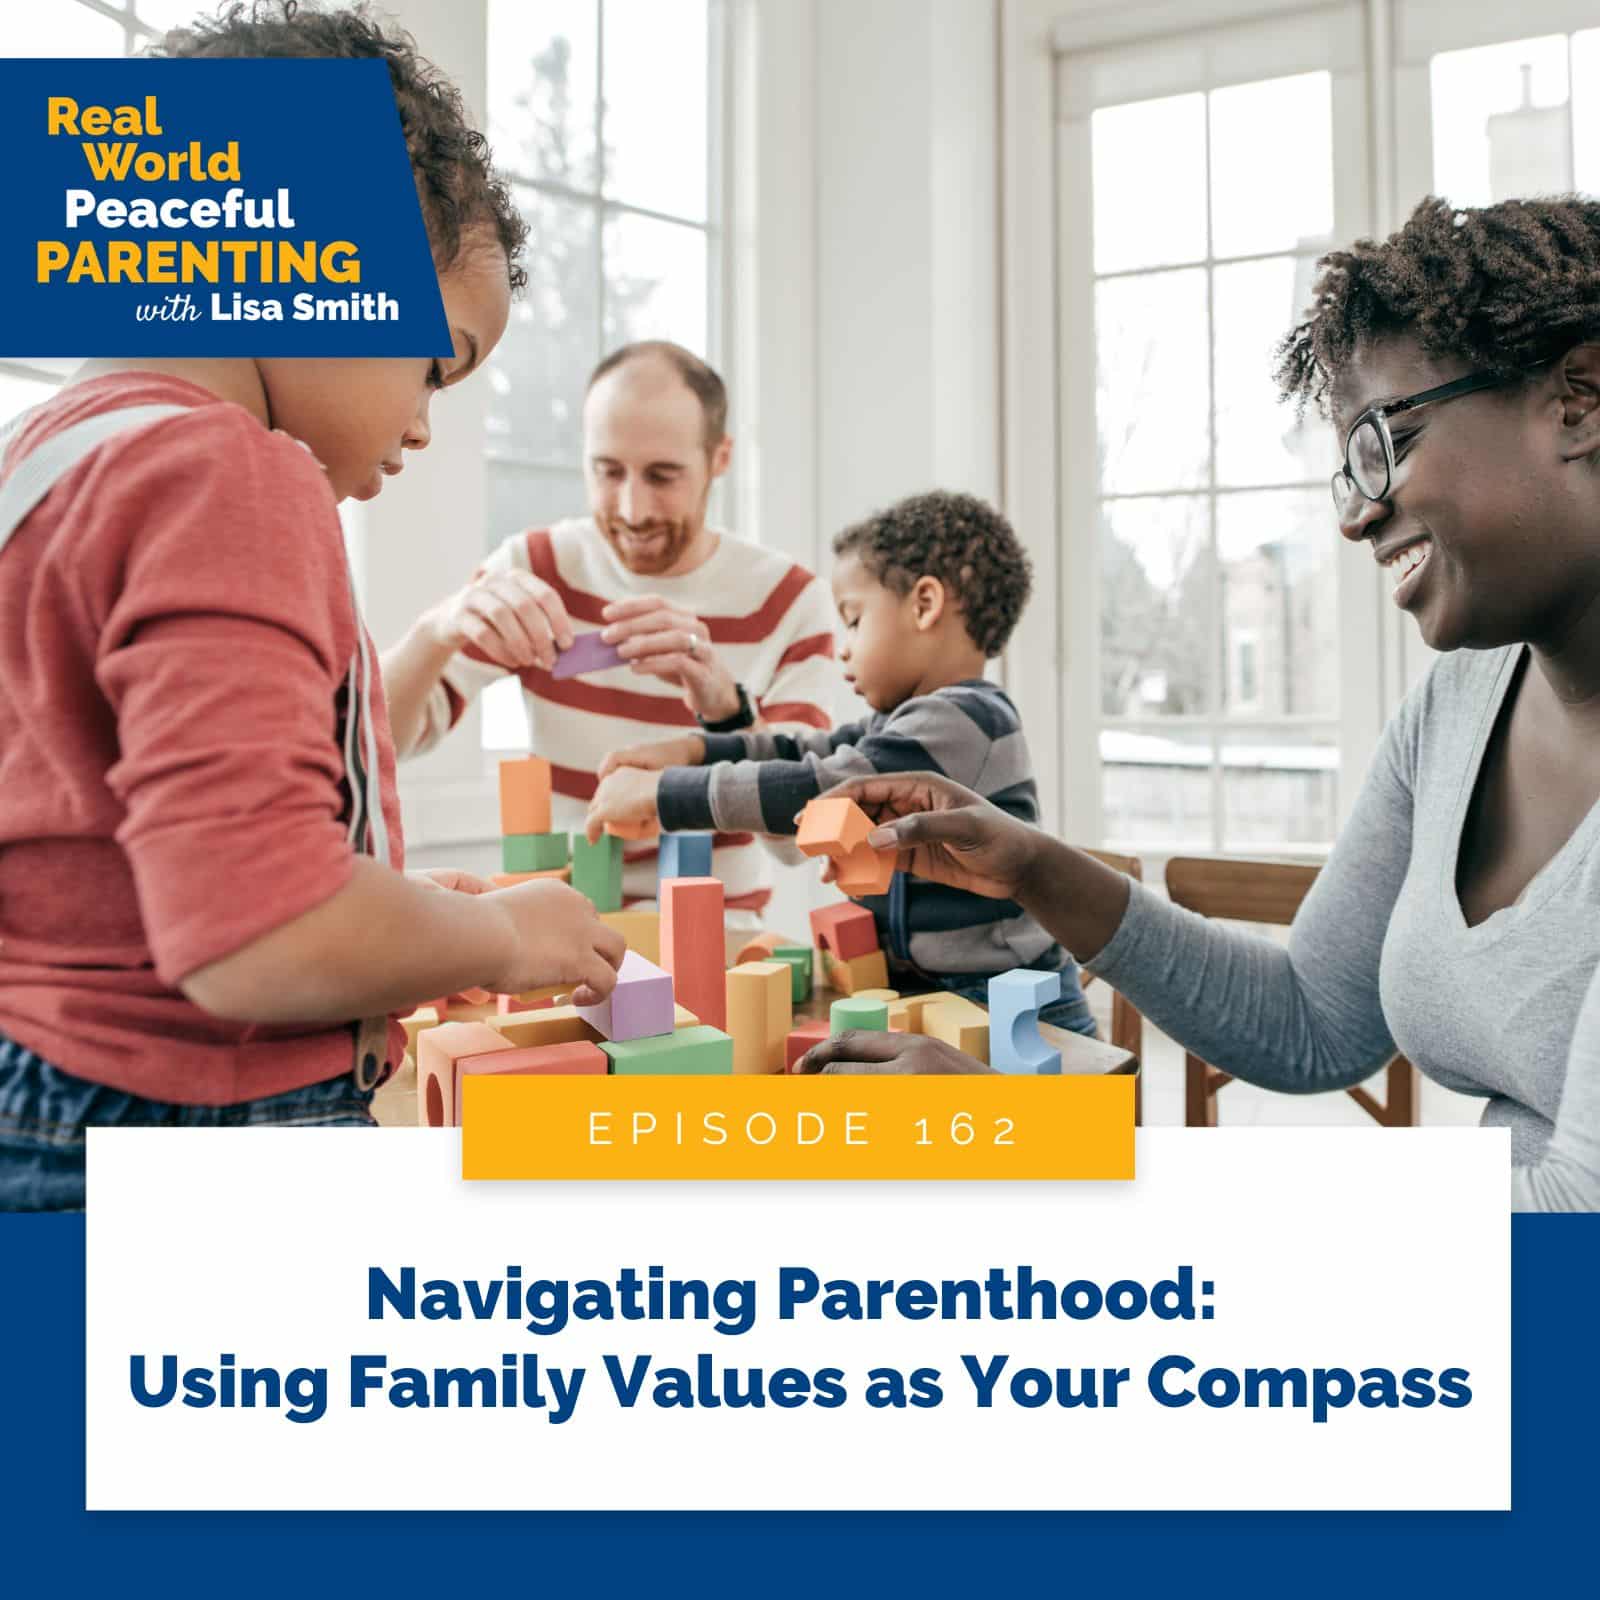 Real World Peaceful Parenting with Lisa Smith | Navigating Parenthood: Using Family Values as Your Compass